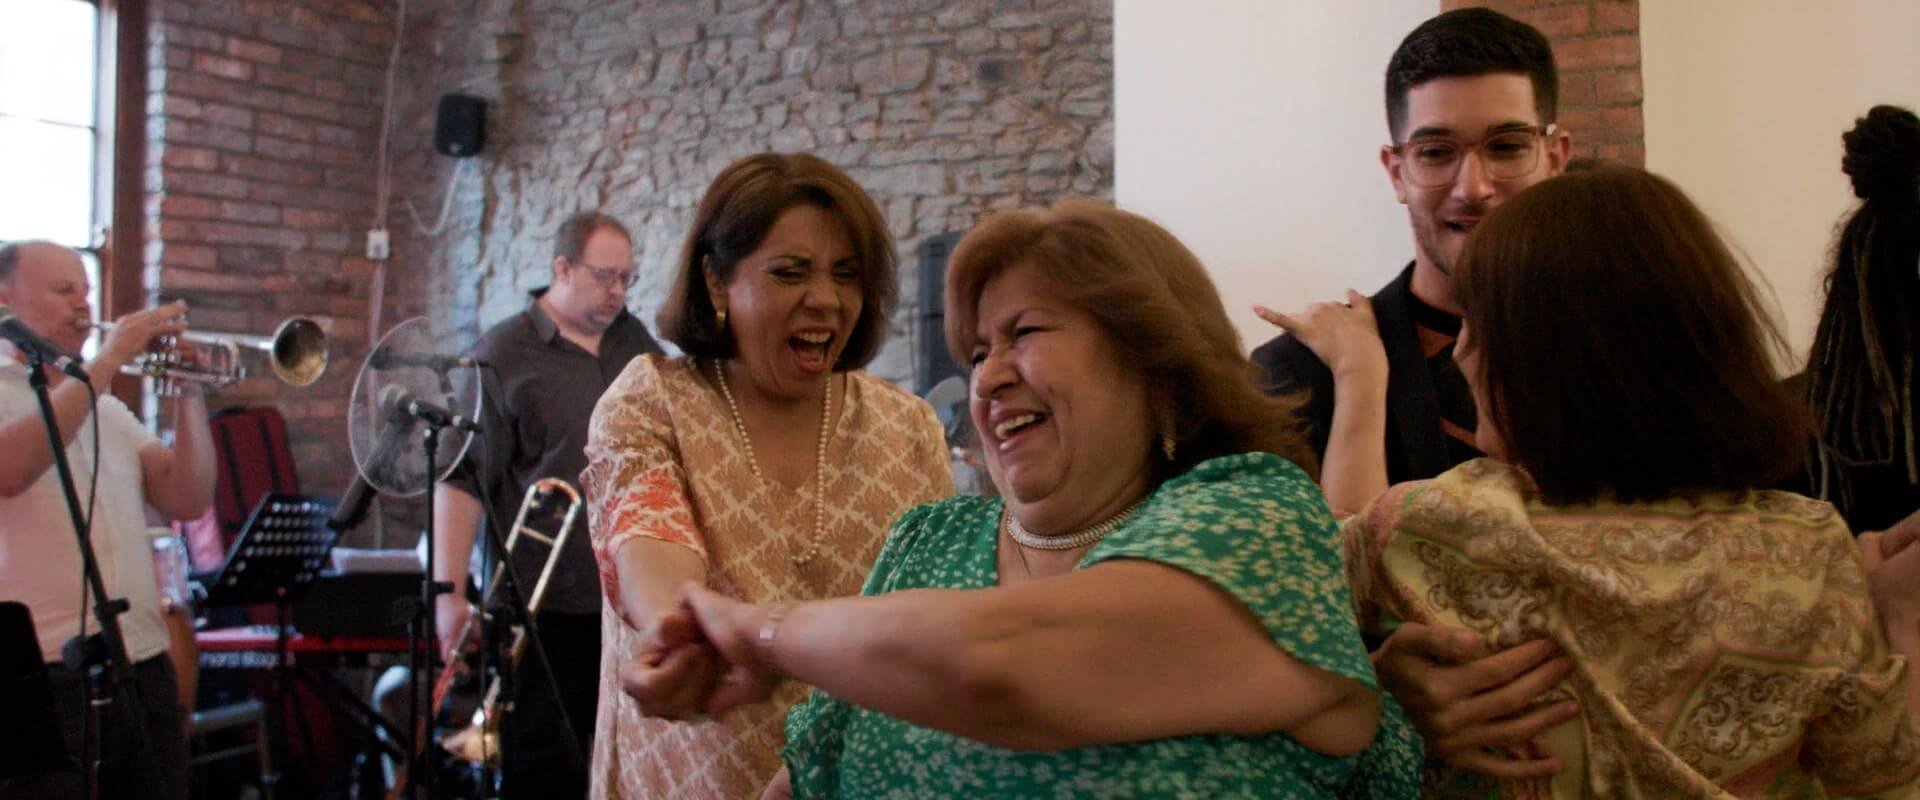 Rita's mother laughing whilst dancing with her sister during the wedding party